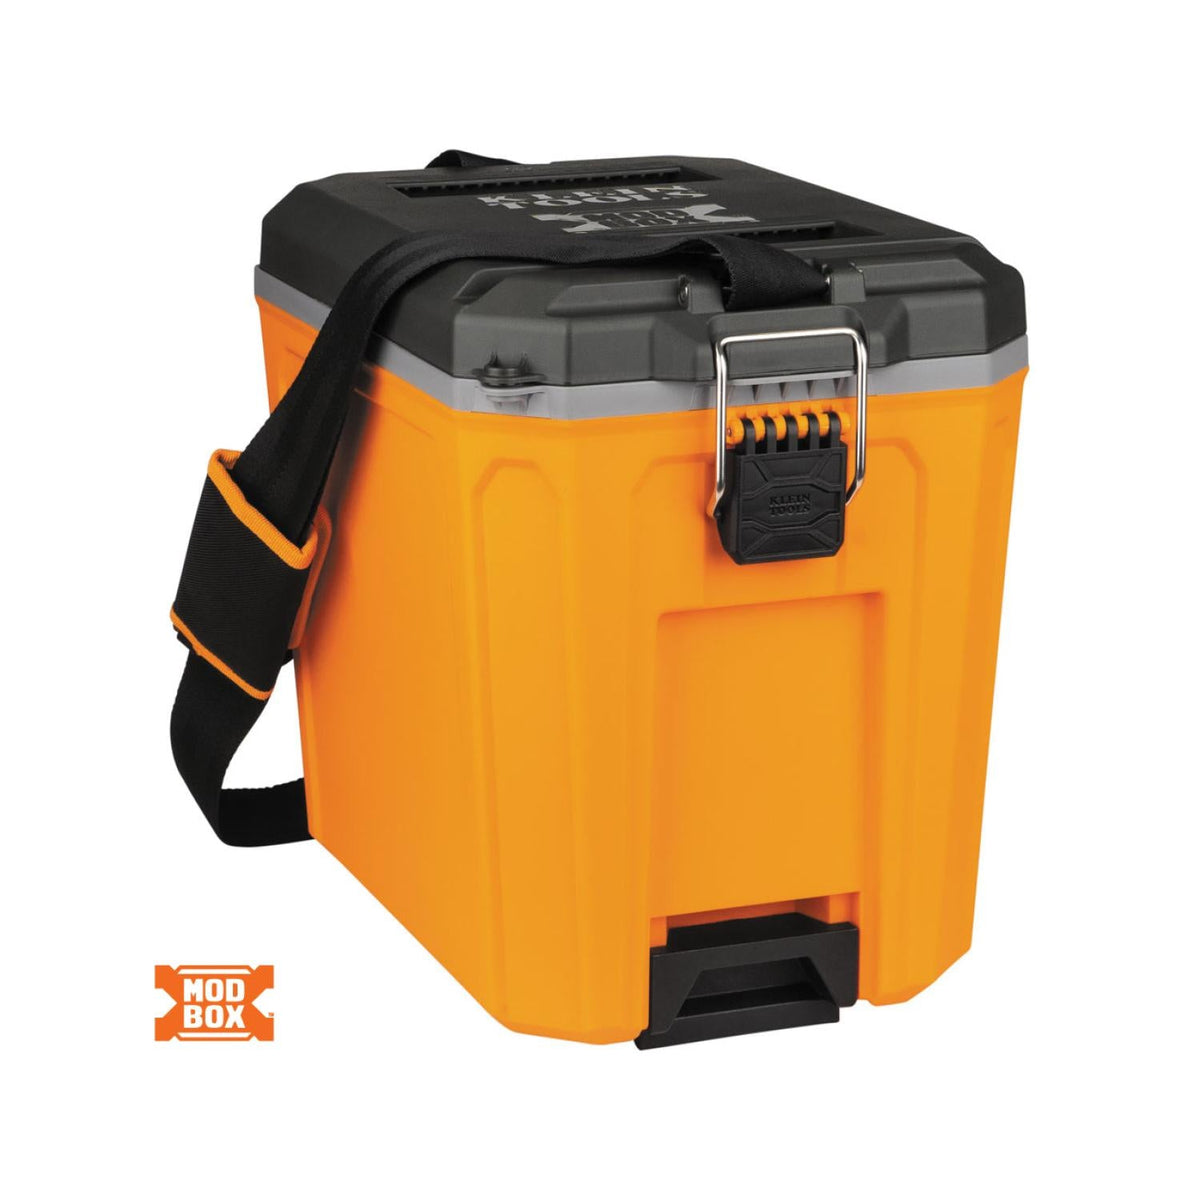 Backpack Cooler, Insulated, 30 Can Capacity - 62810BPCLR